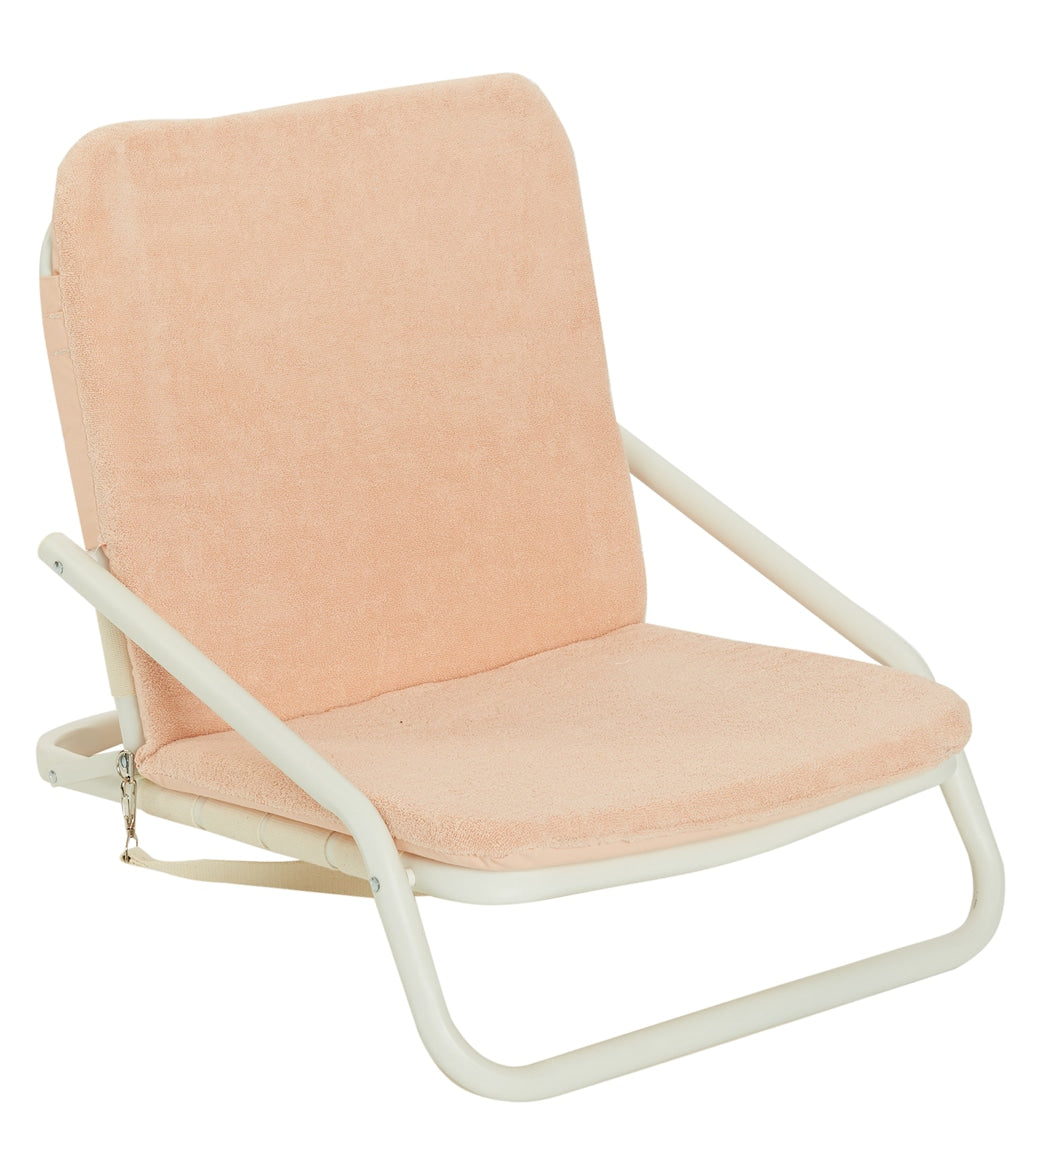 SunnyLife Cushioned Beach Chair at SwimOutlet.com